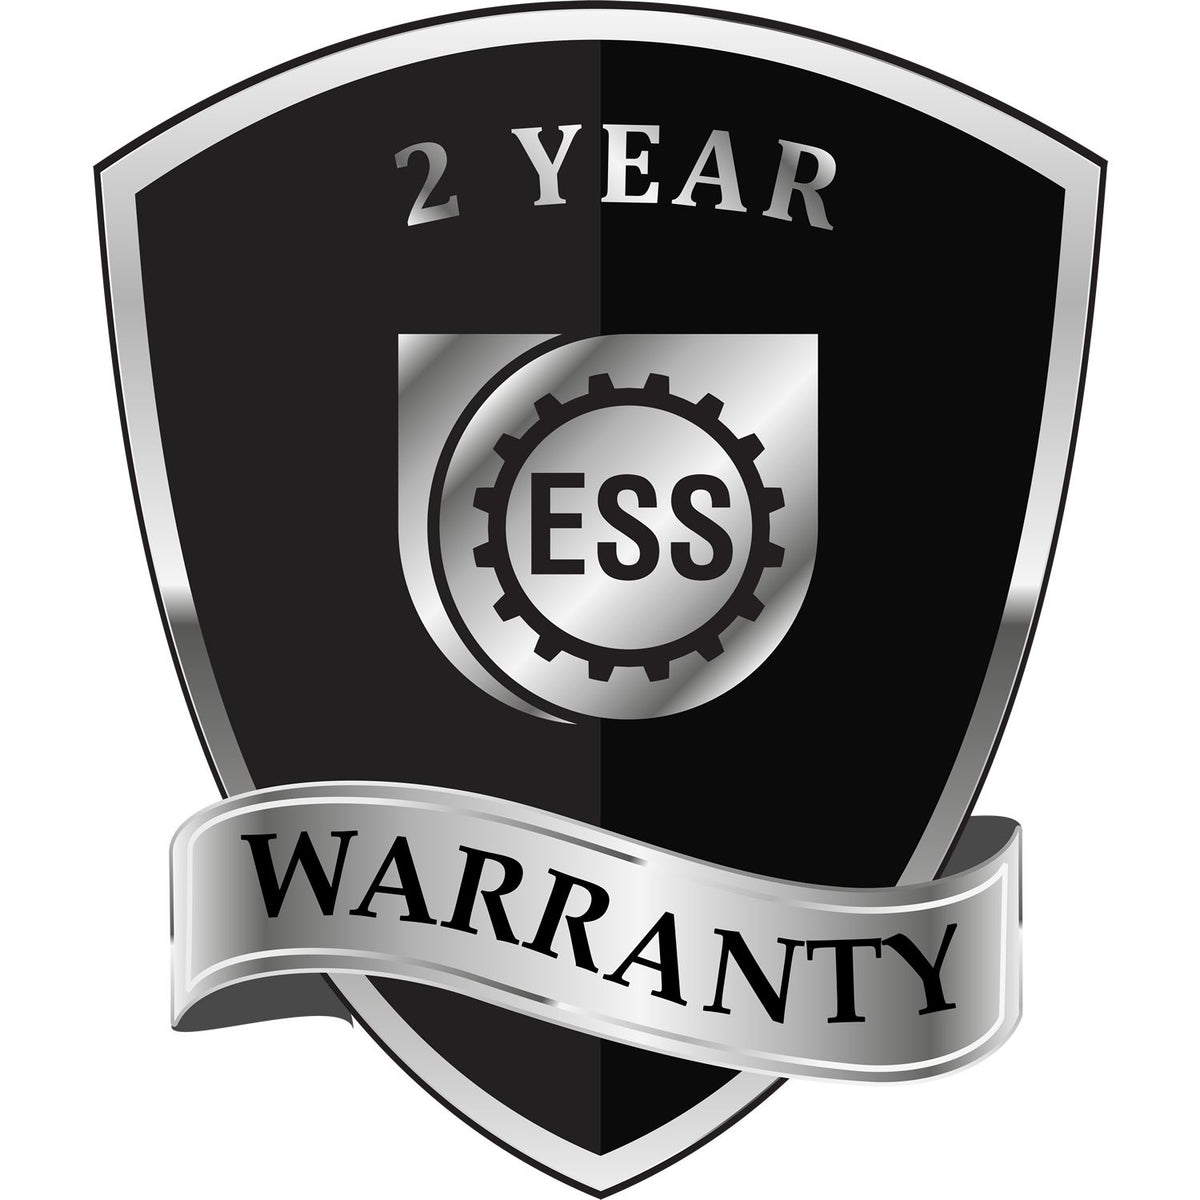 A black and silver badge or emblem showing warranty information for the Hybrid Hawaii Landscape Architect Seal